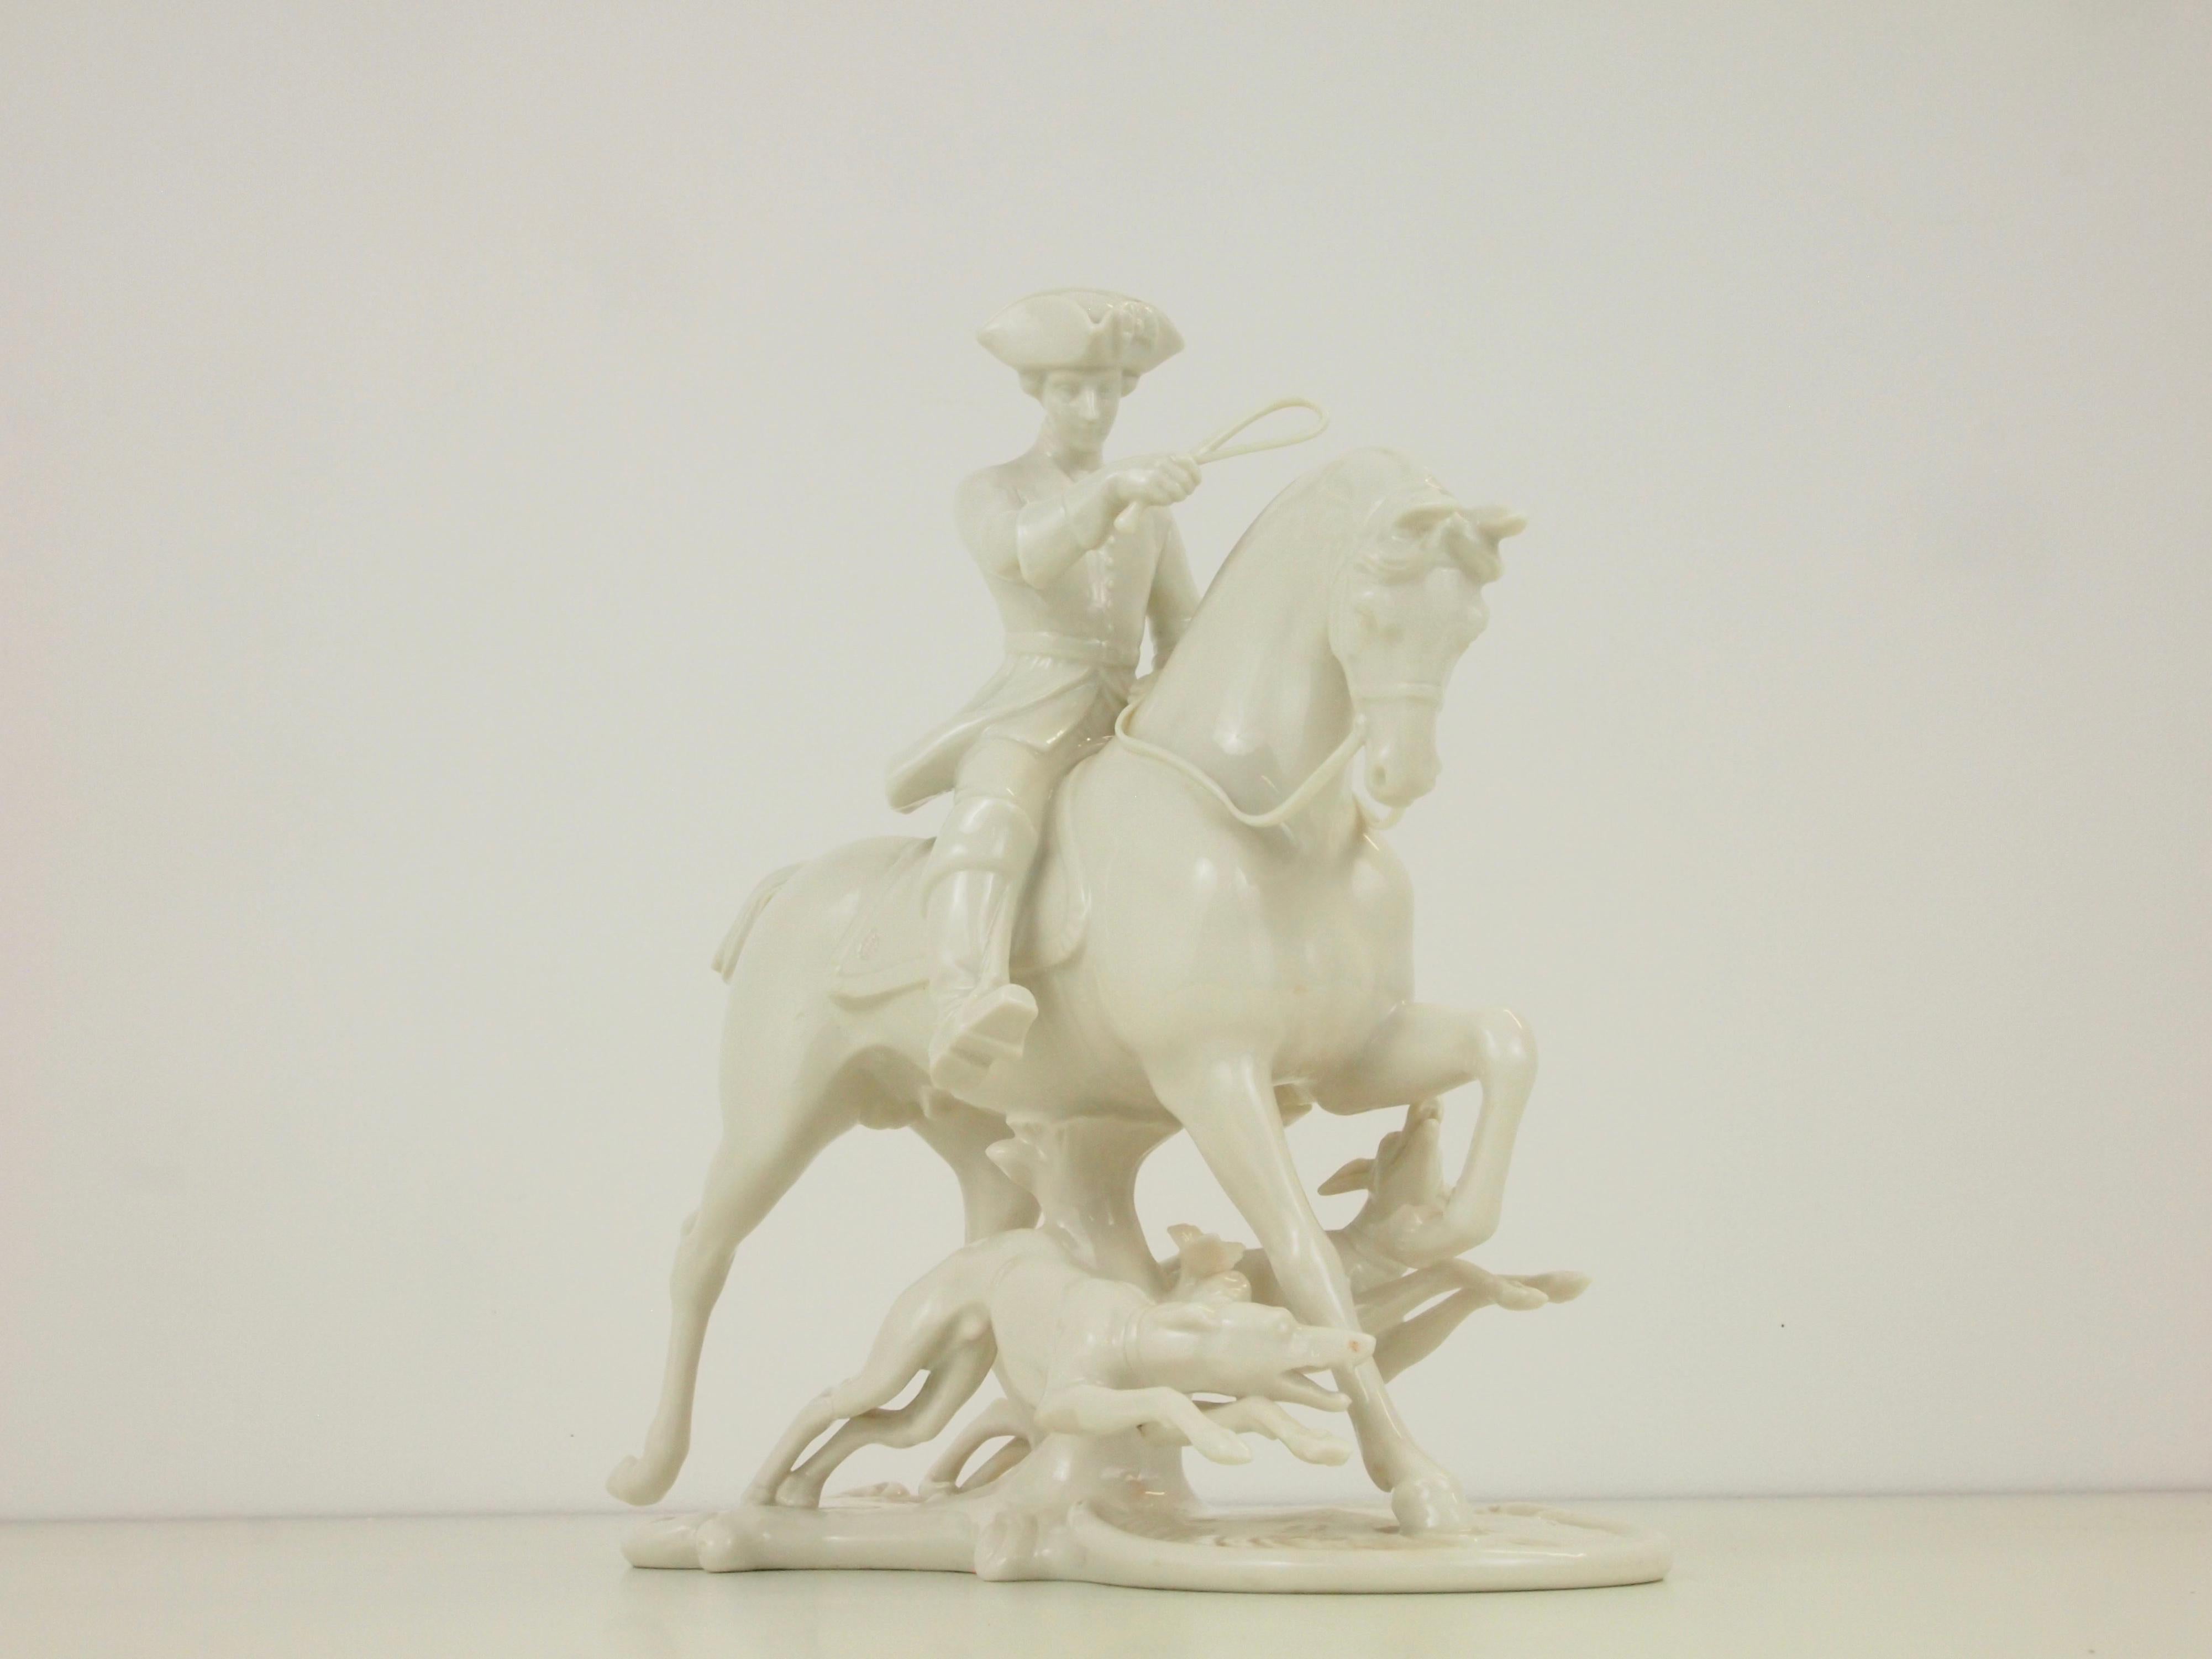 Nymphenburg Porcelain Figurine Depicting a Horse Rider in a Hunting Scene For Sale 2